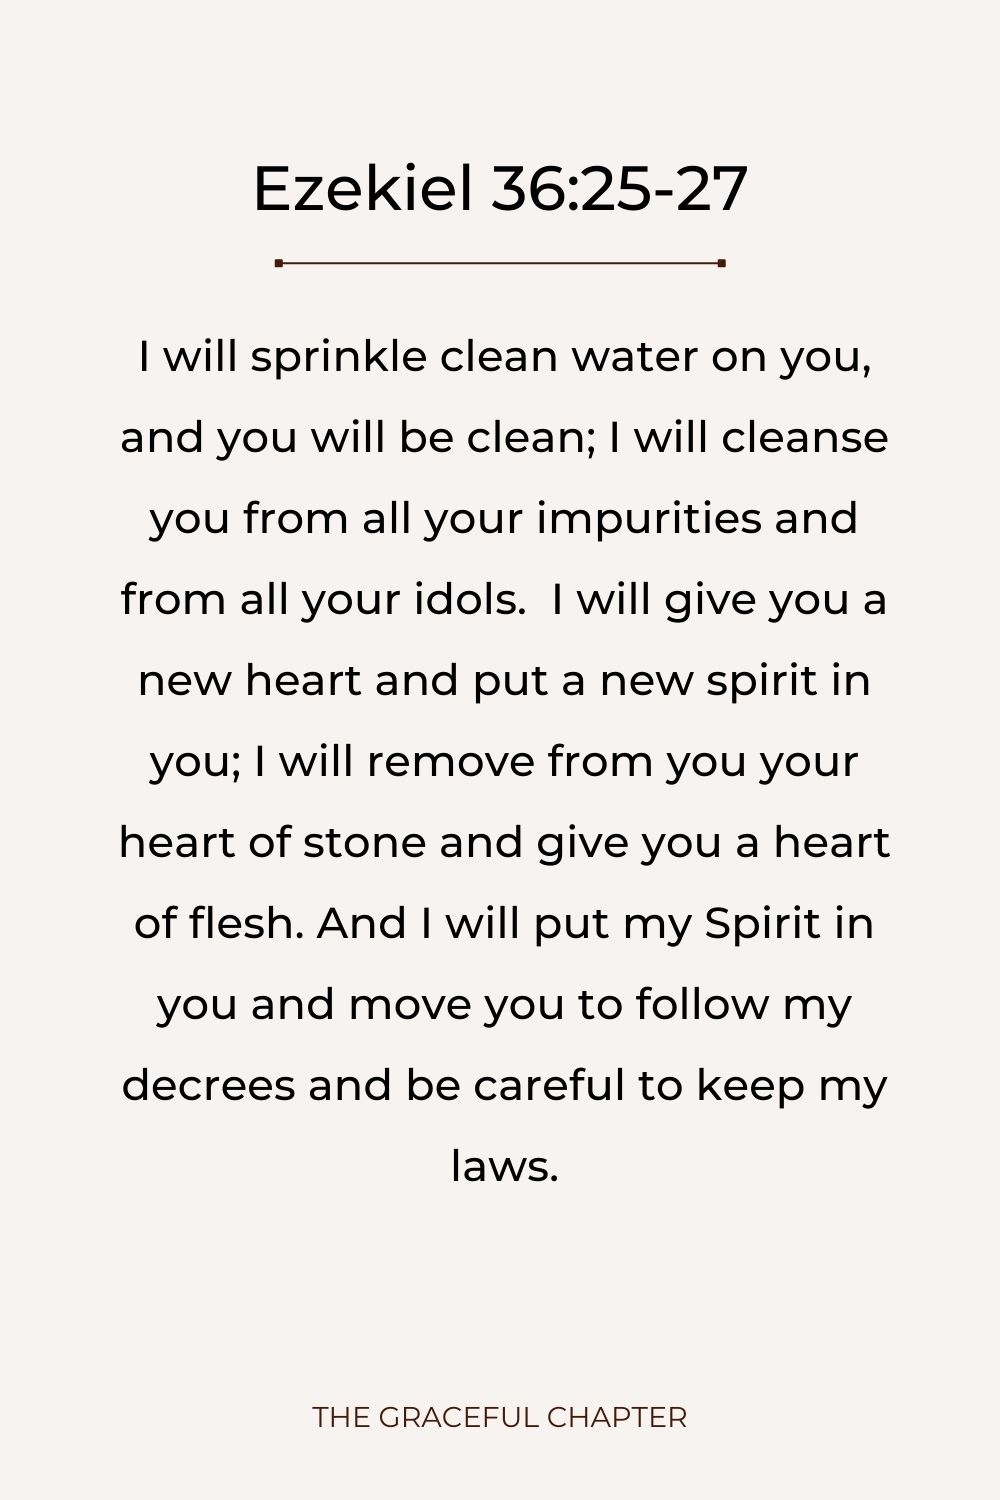 I will sprinkle clean water on you, and you will be clean; I will cleanse you from all your impurities and from all your idols.  I will give you a new heart and put a new spirit in you; I will remove from you your heart of stone and give you a heart of flesh. And I will put my Spirit in you and move you to follow my decrees and be careful to keep my laws. Ezekiel 36:25-27